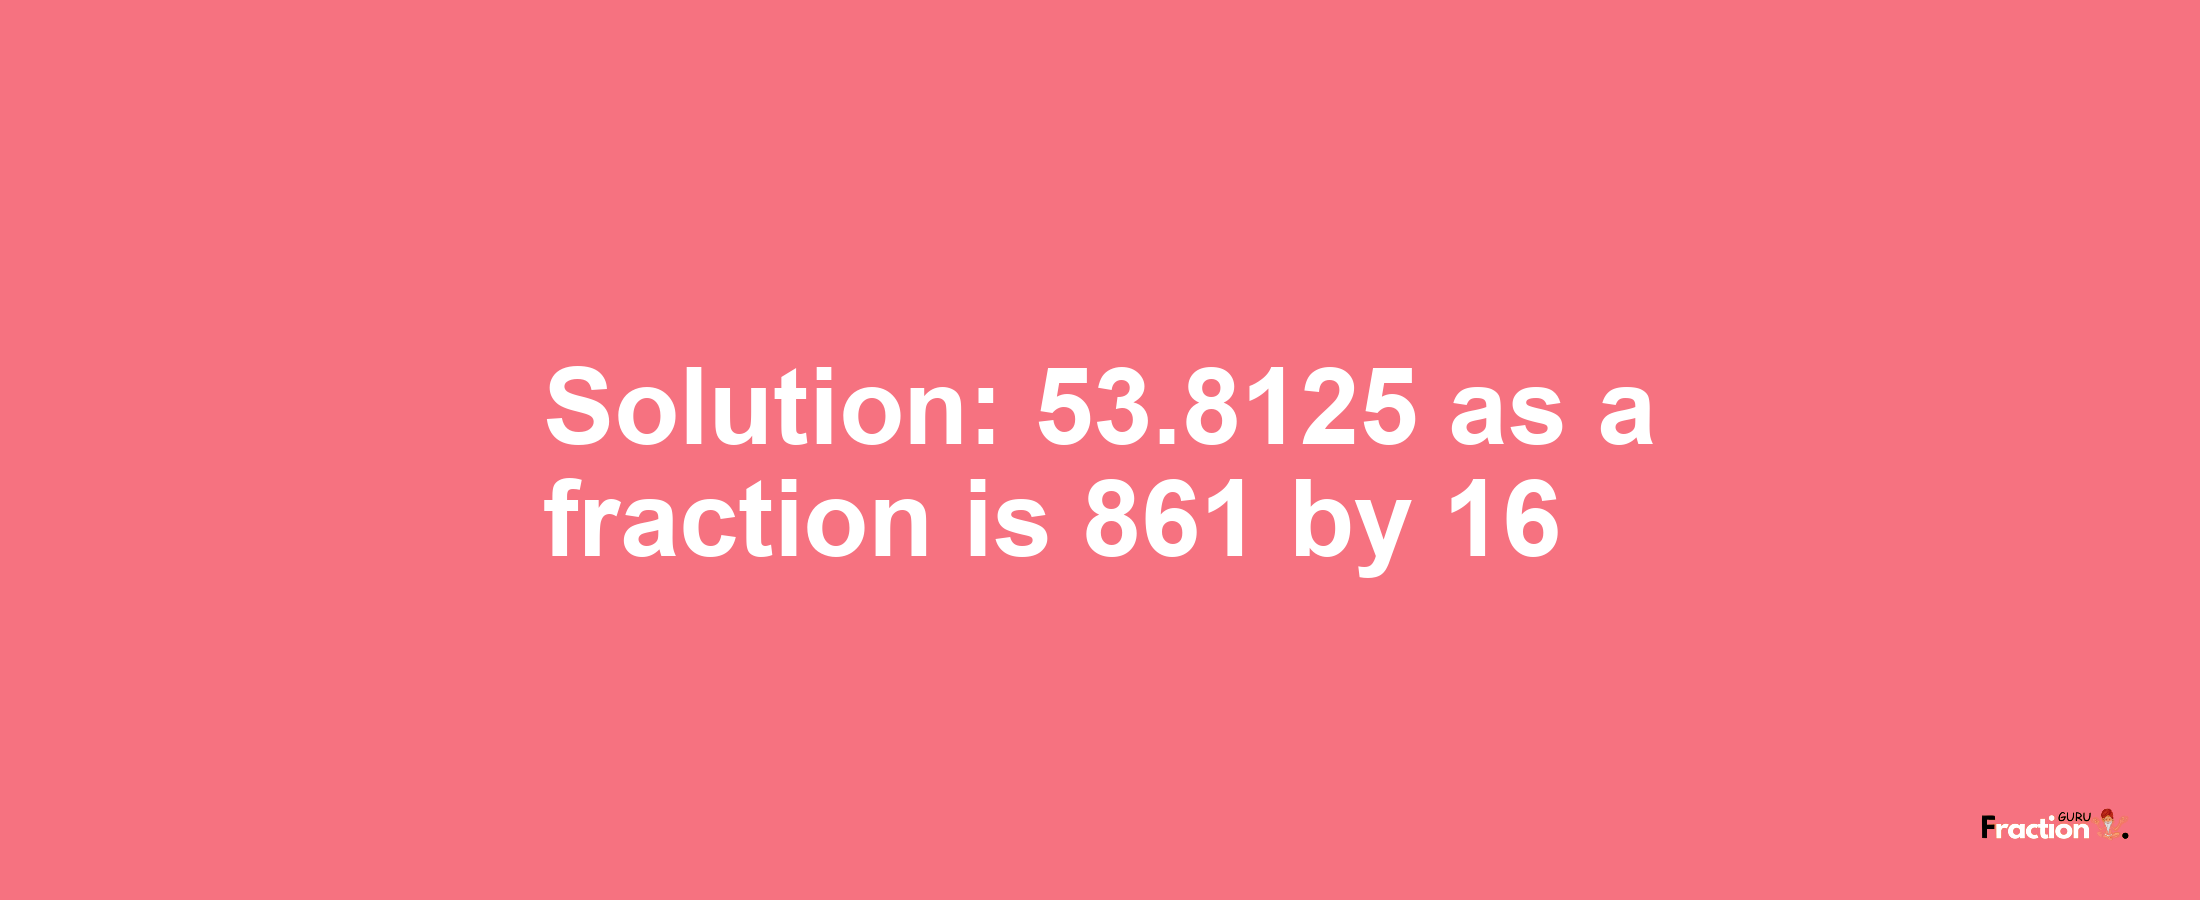 Solution:53.8125 as a fraction is 861/16